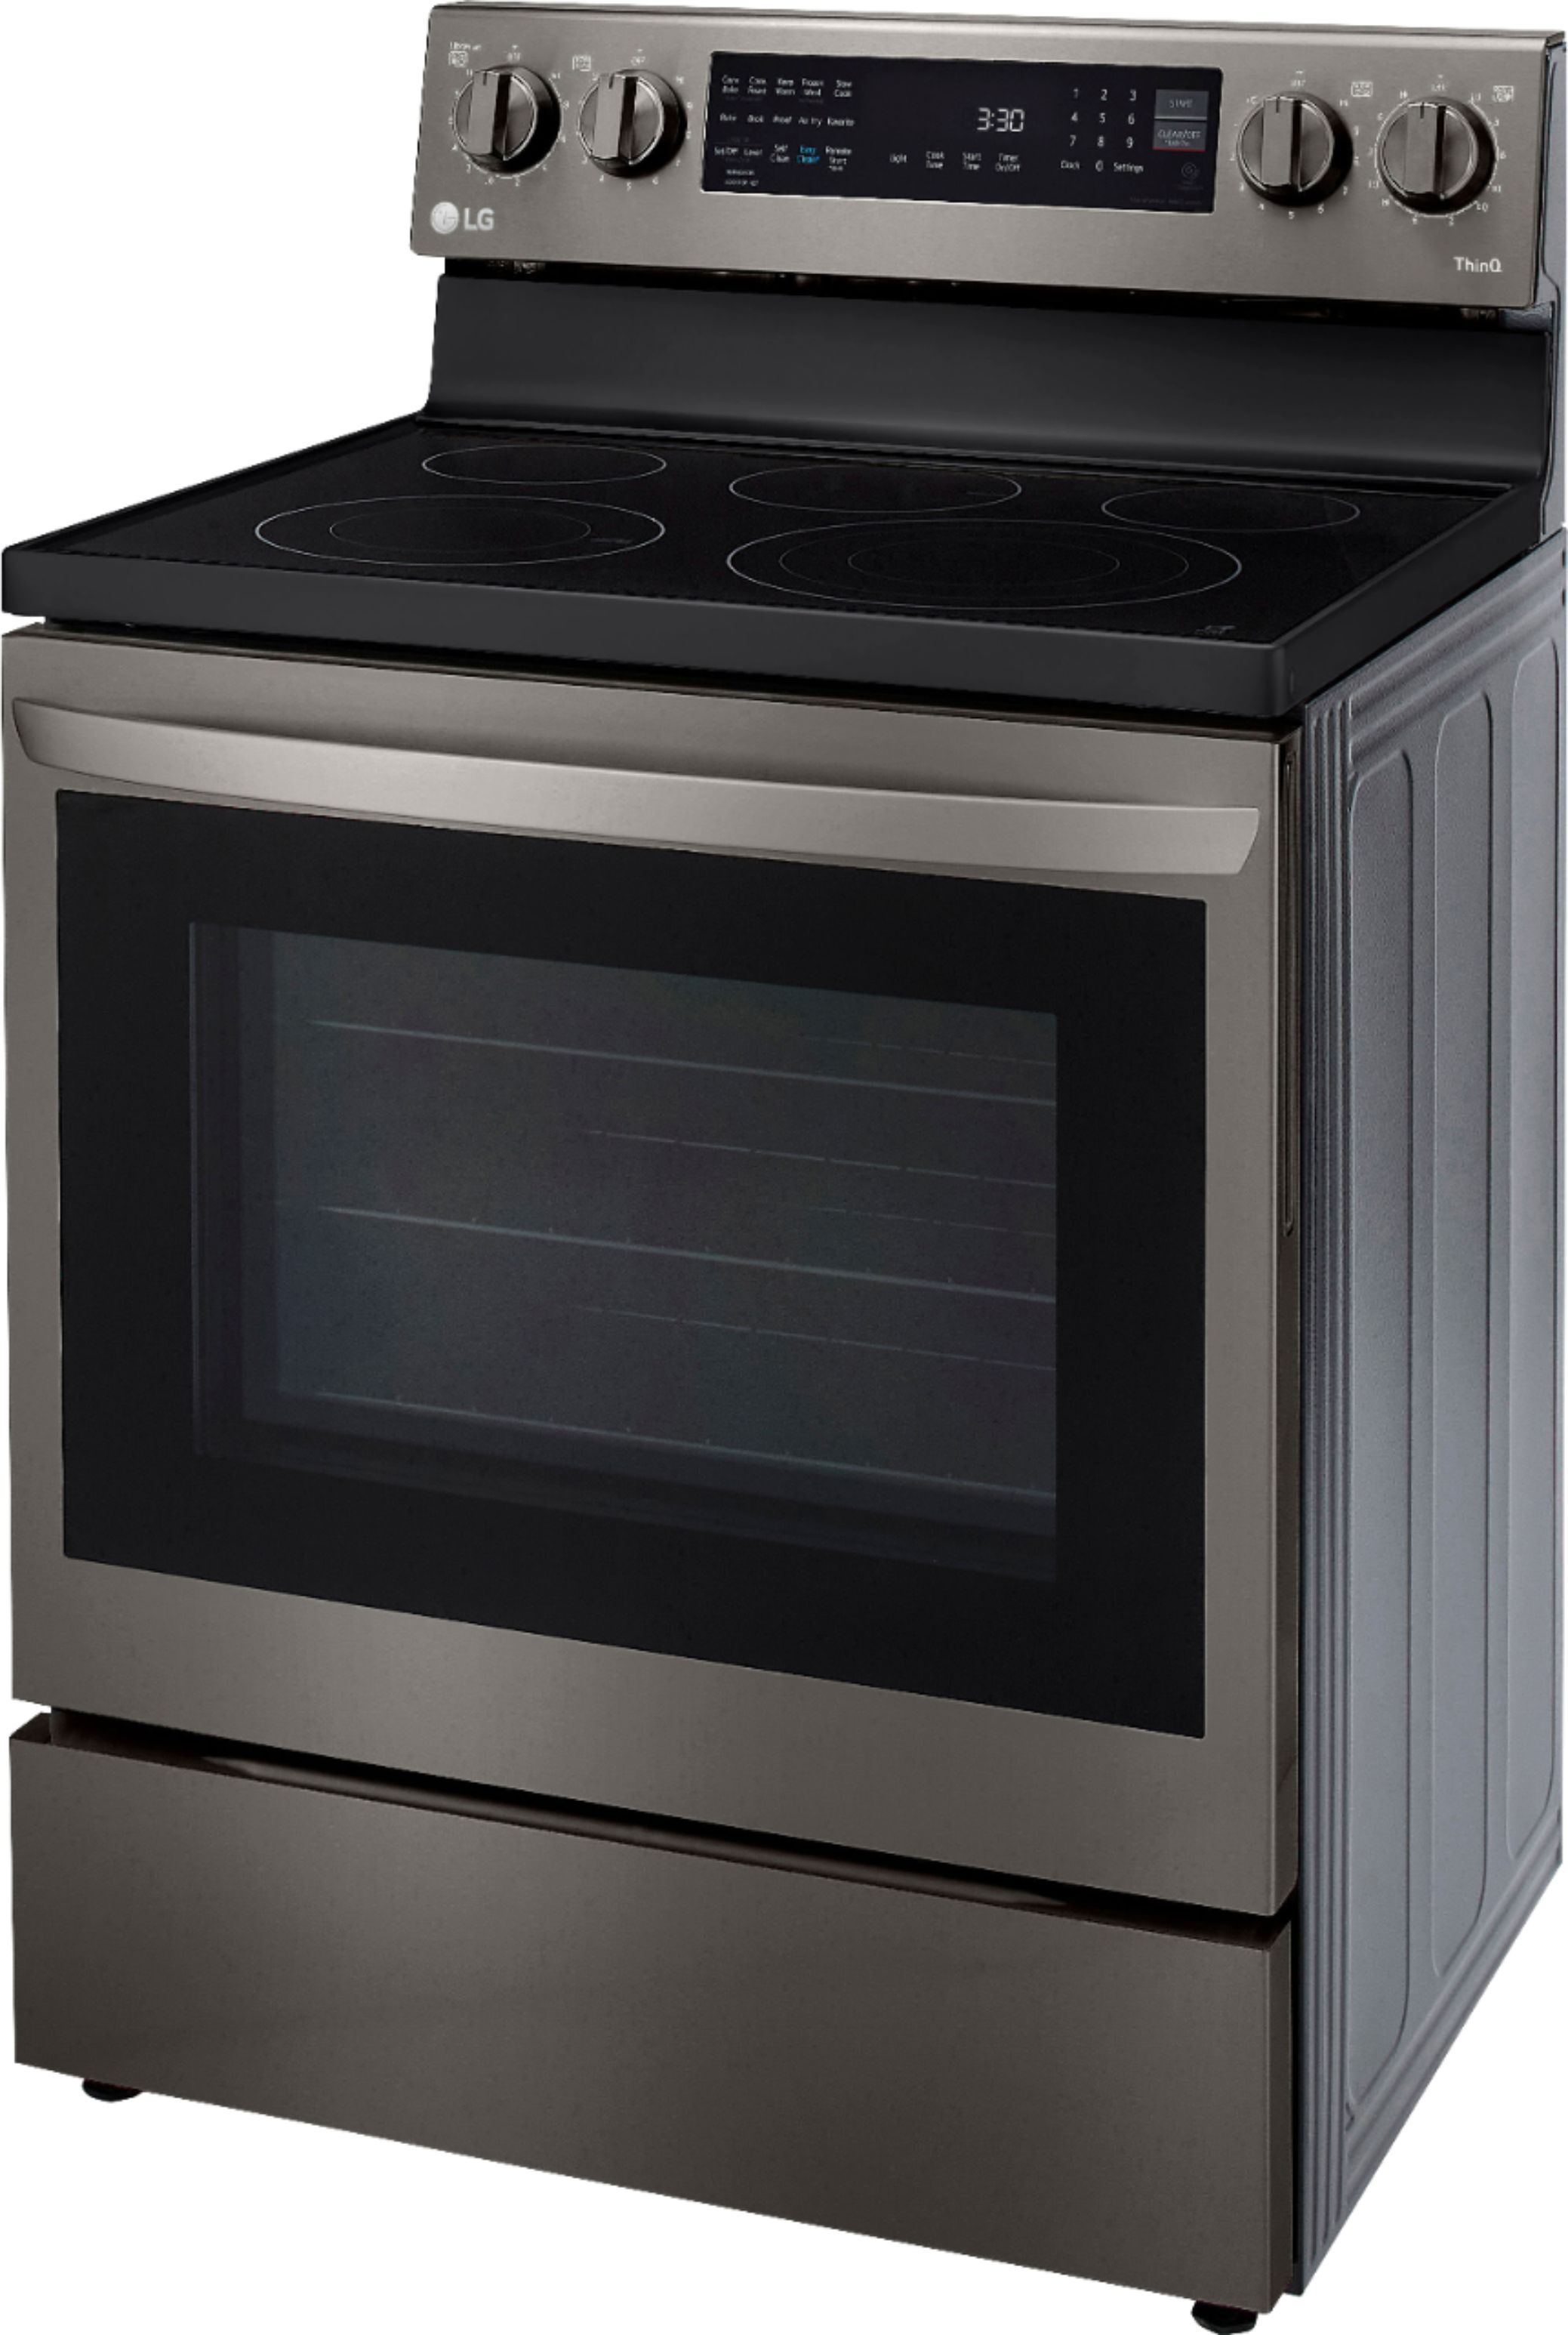 Angle View: LG - 6.3 cu ft Electric Slide In Range with Air Fry and Smart Wi-Fi Enabled - Black stainless steel